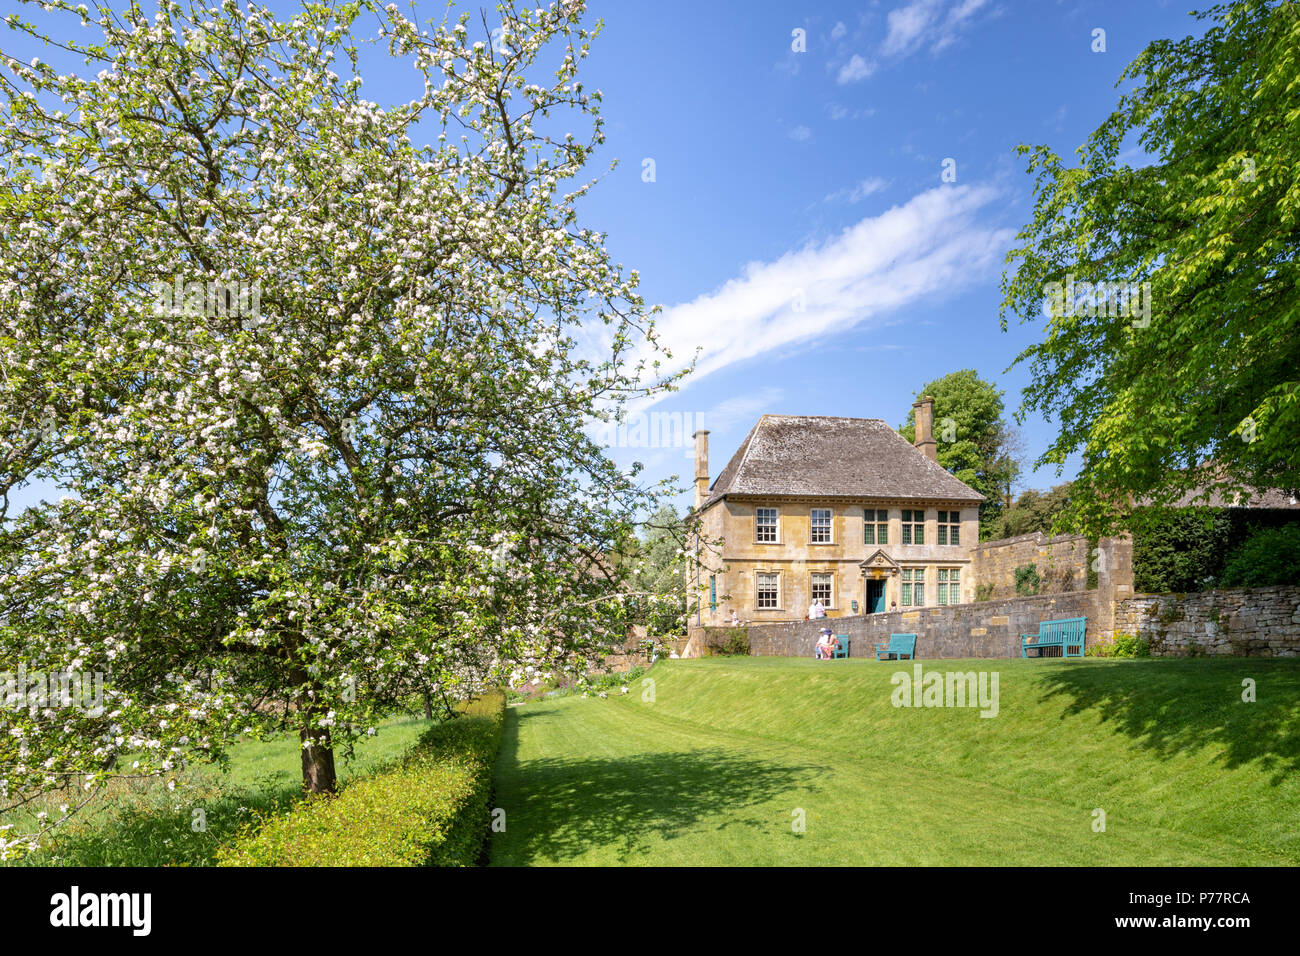 Snowshill Manor in the Cotswold village of Snowshill, Gloucestershire UK Stock Photo